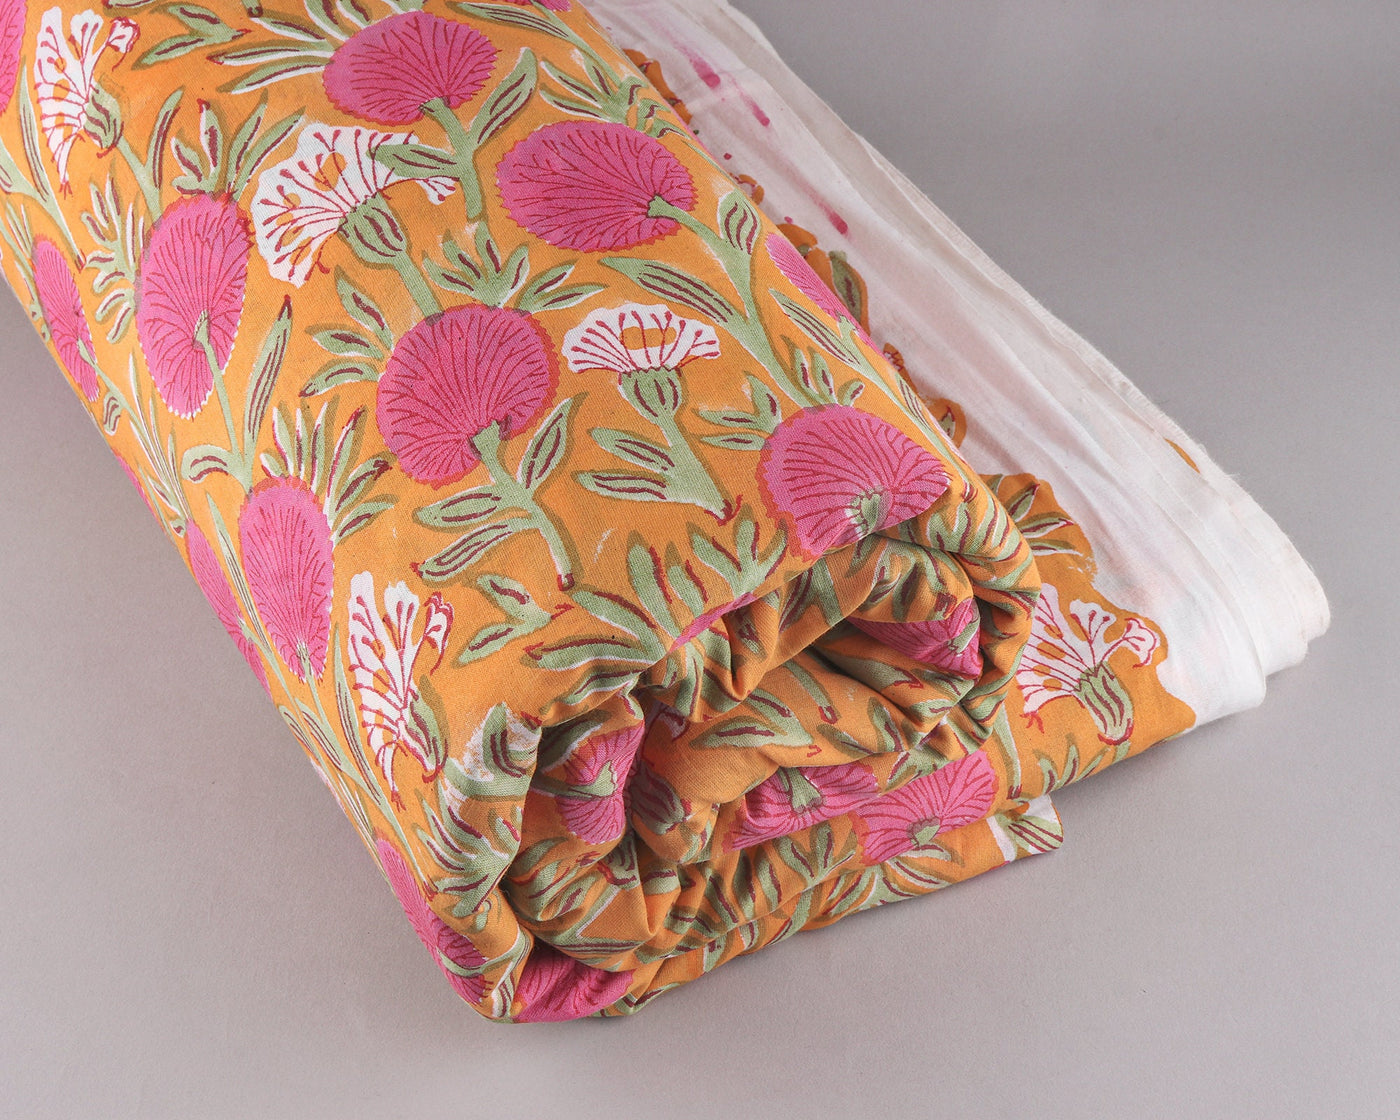 Tangerine Orange and Bubblegum Pink Indian Hand Block Printed 100% Pure Cotton Cloth, Fabric by the yard, Women's Clothing Curtains Pillows